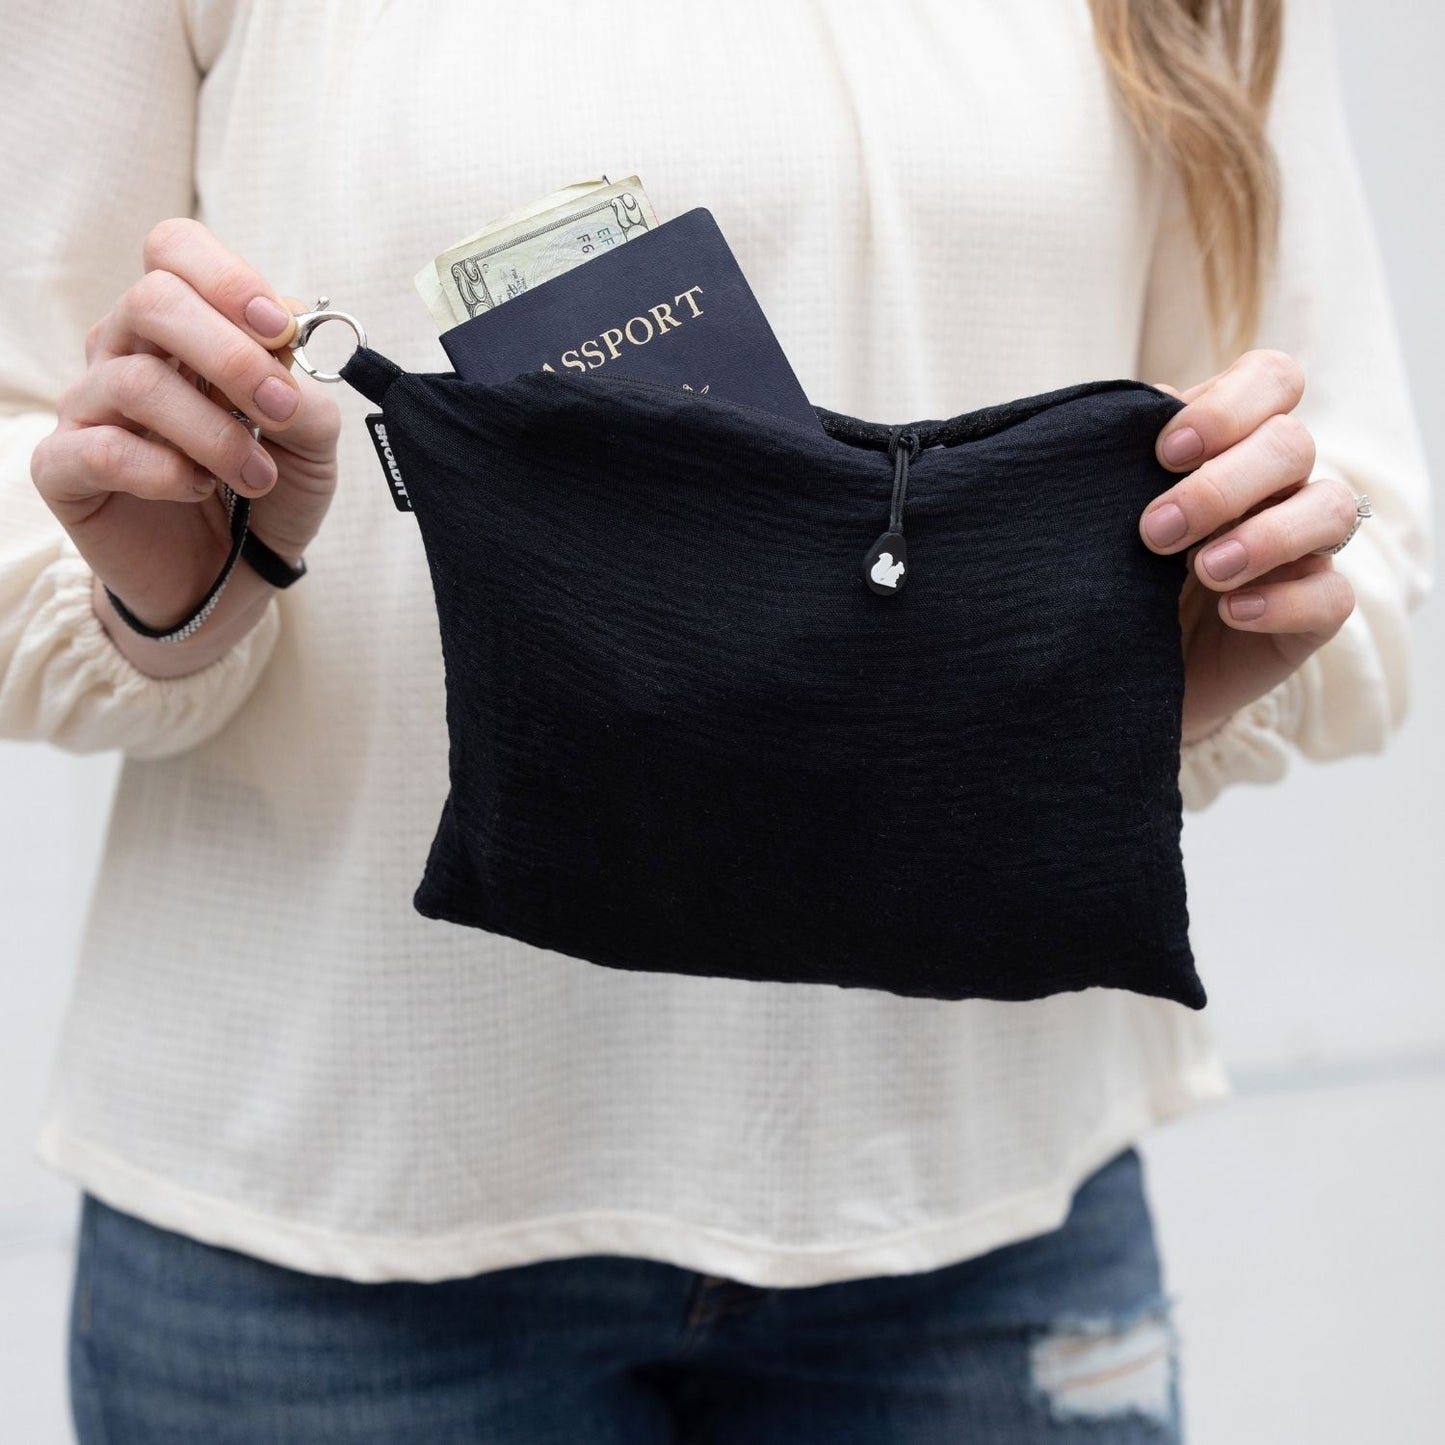 SHOLDIT Convertible Infinity Scarf with Pocket Peaceful Black shown as a clutch